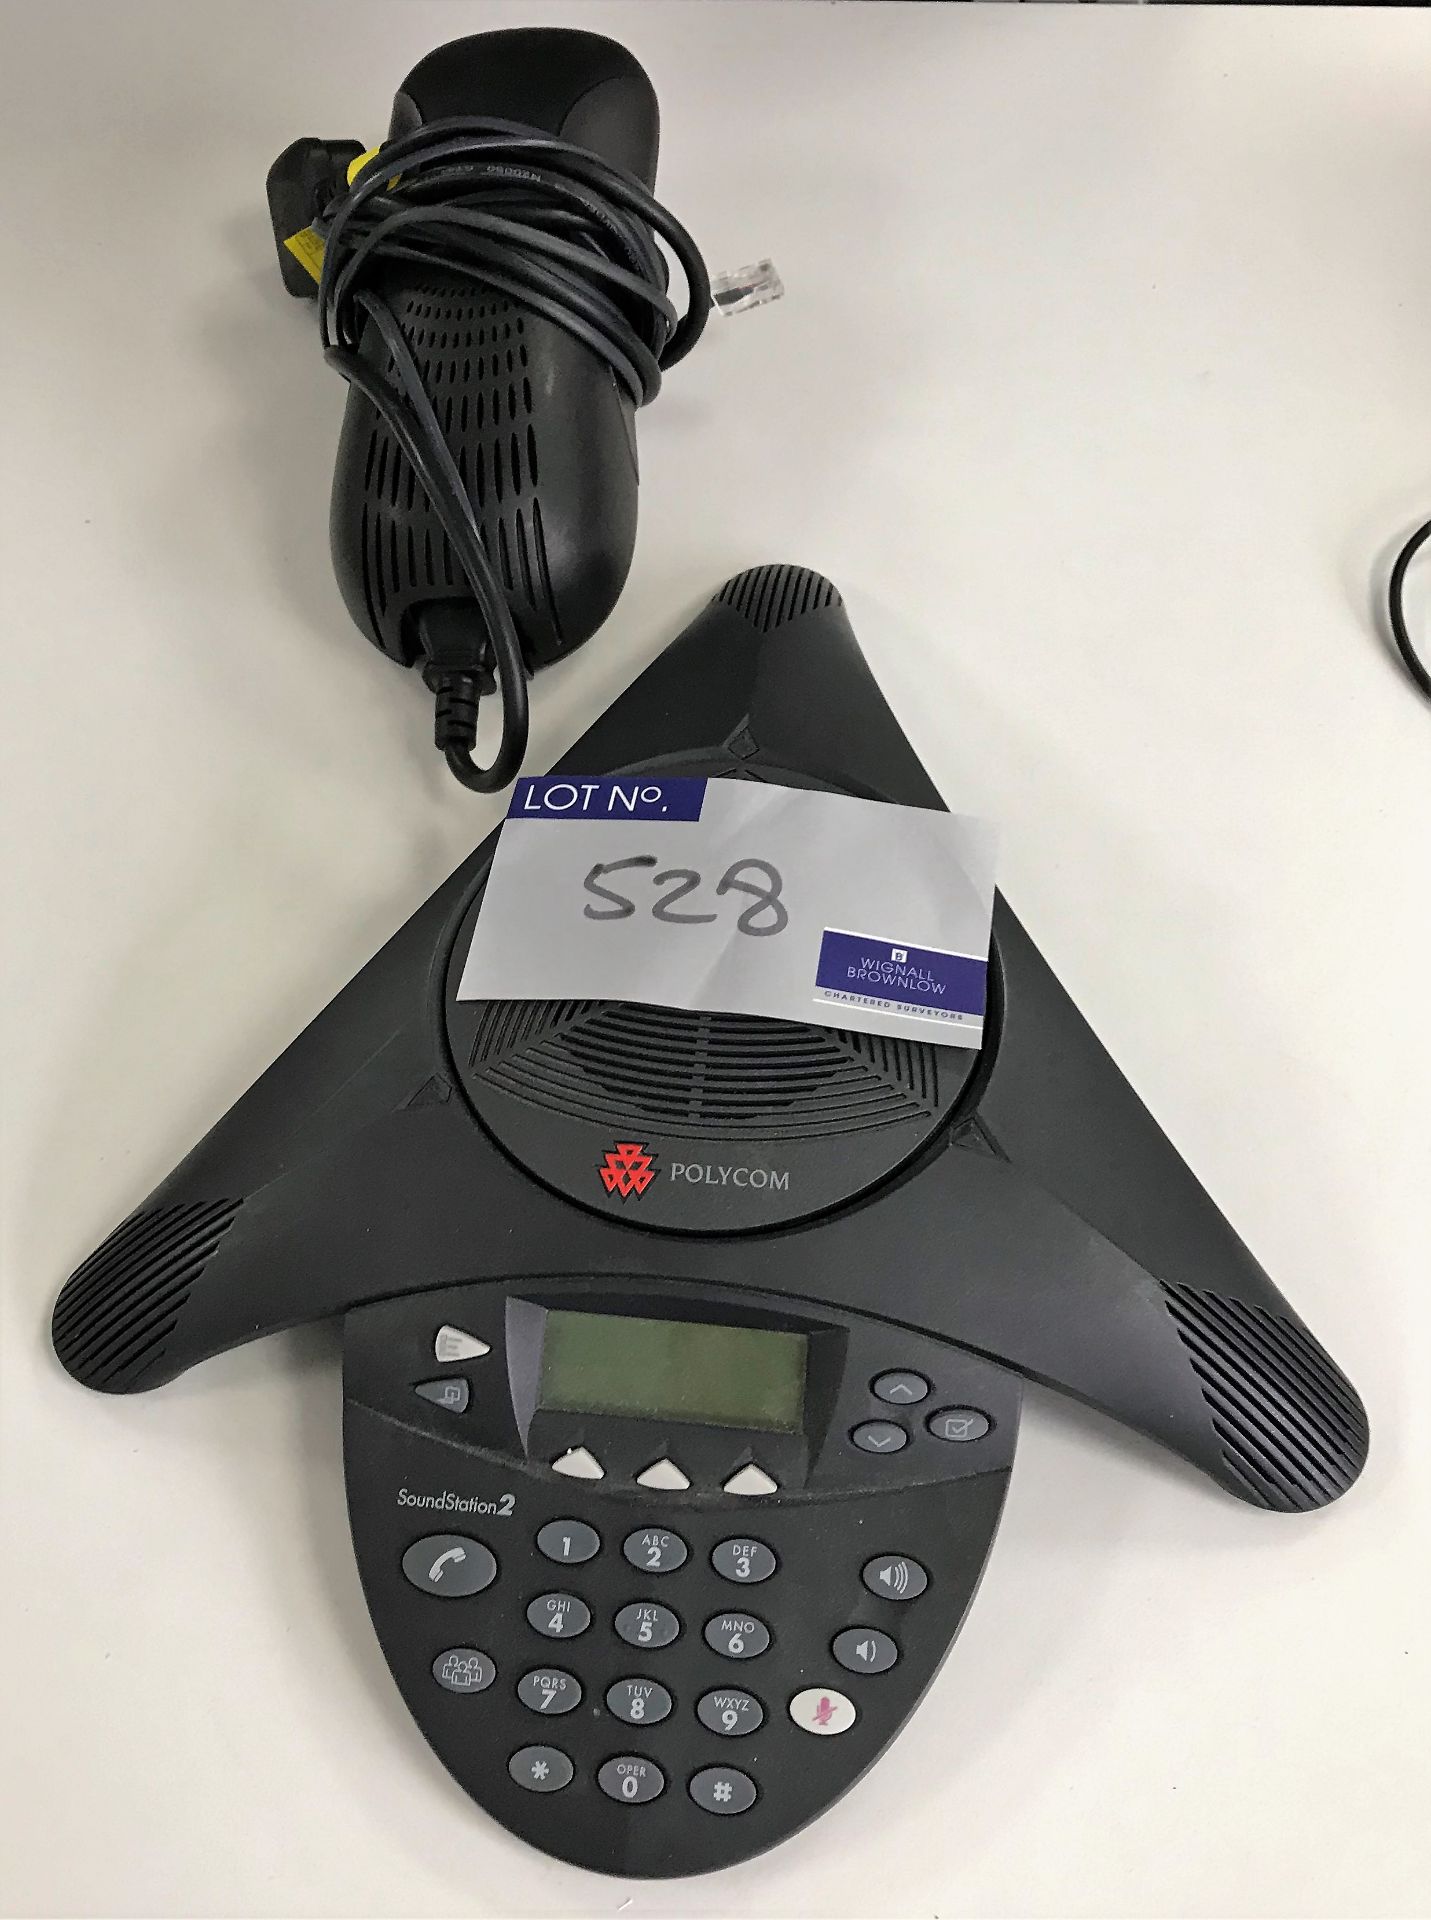 A Polycom Soundstation 2 Conference Phone with Universal Power Supply Modules.